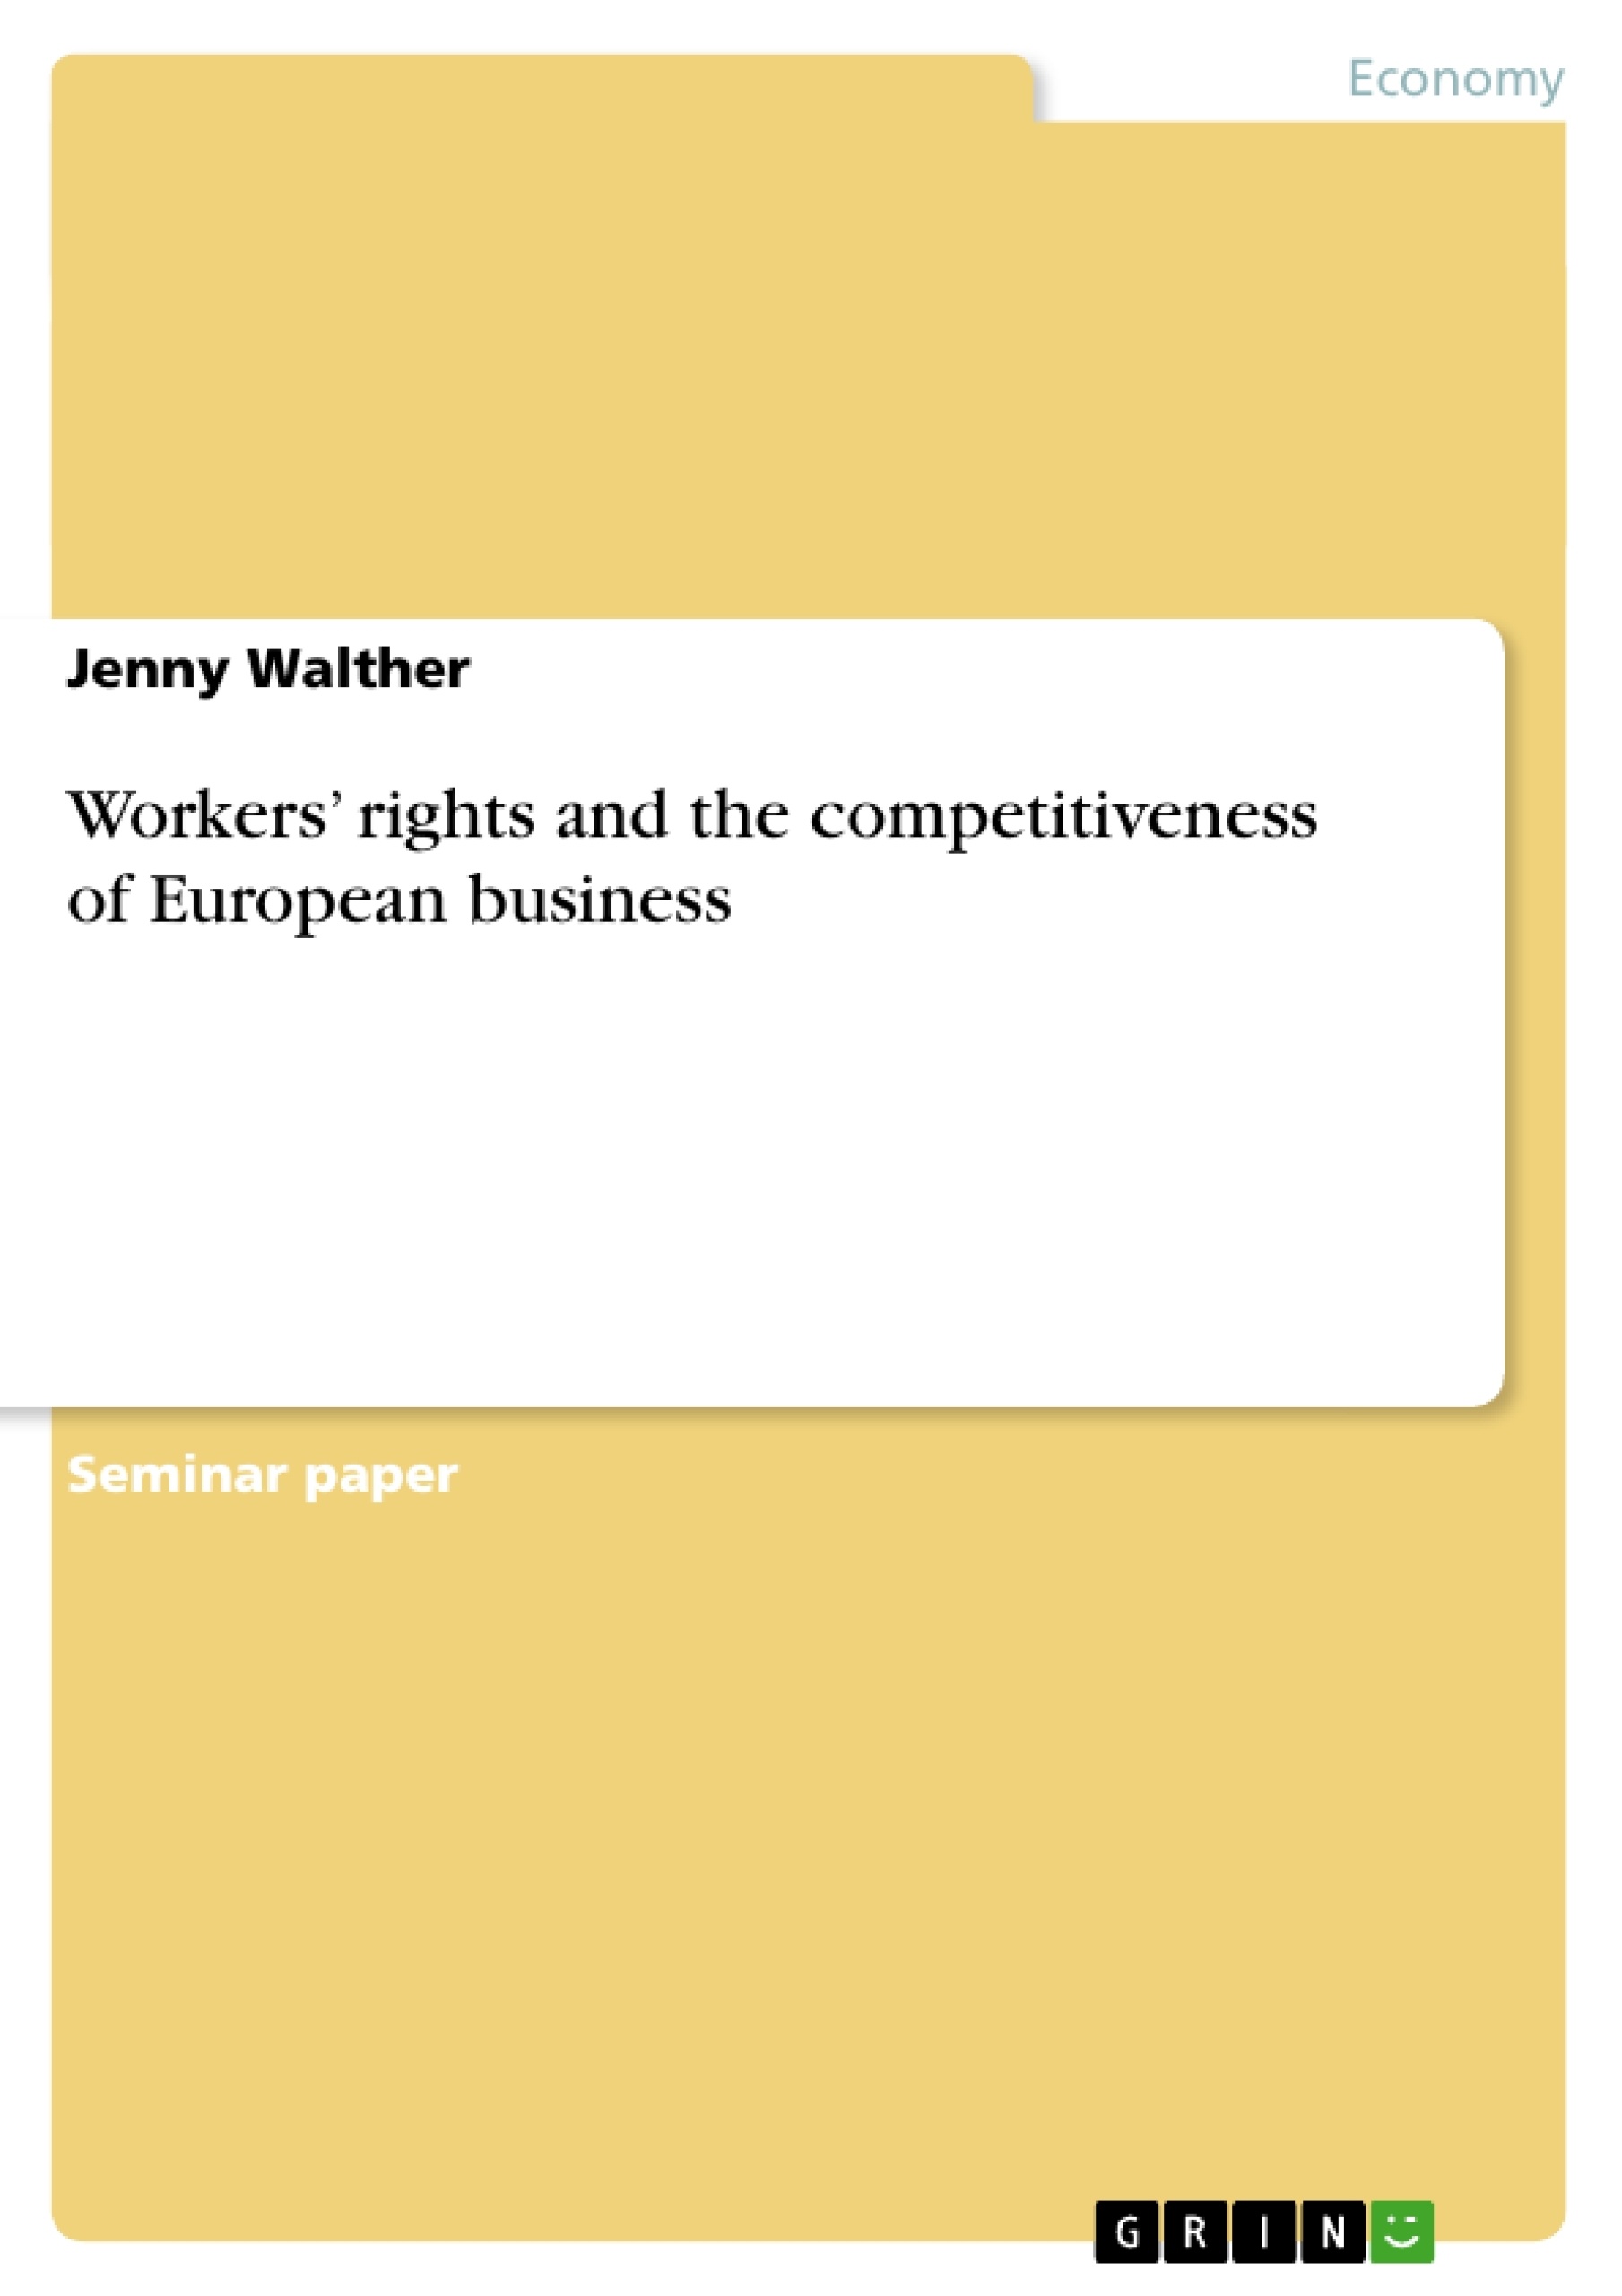 Title: Workers’ rights and the competitiveness of European business